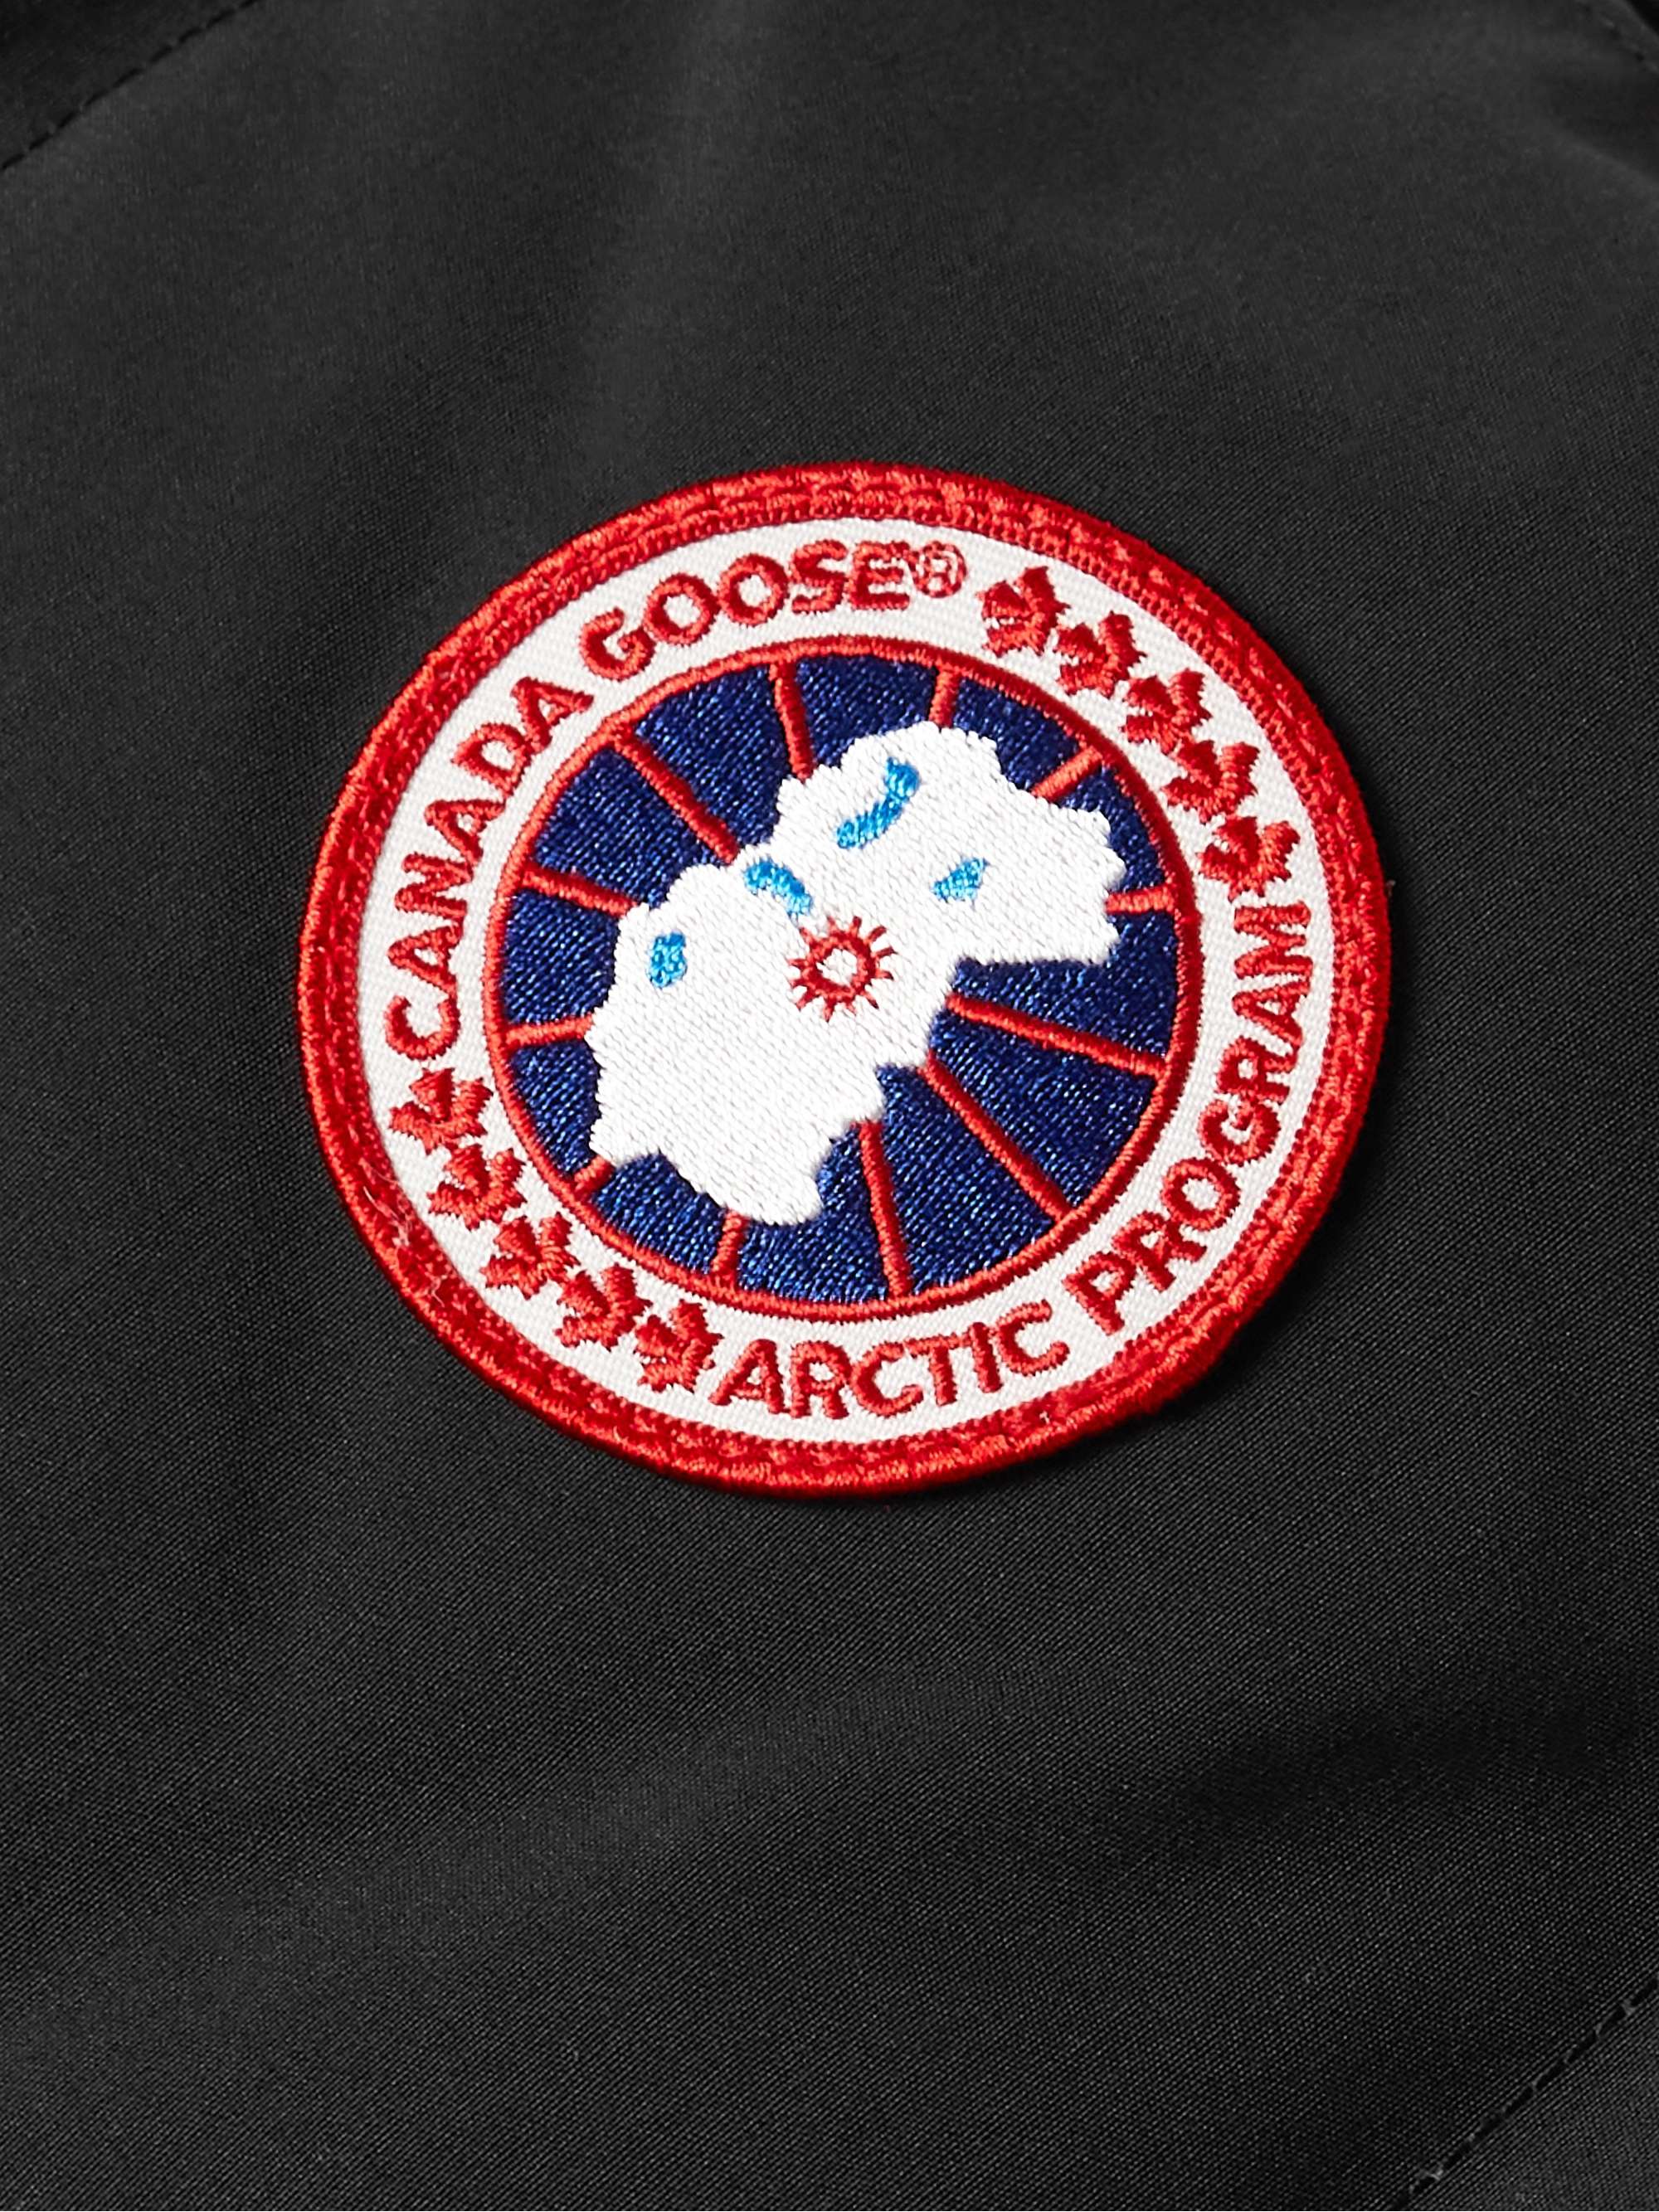 CANADA GOOSE Slim-Fit Freestyle Crew Quilted Arctic Tech Down Gilet